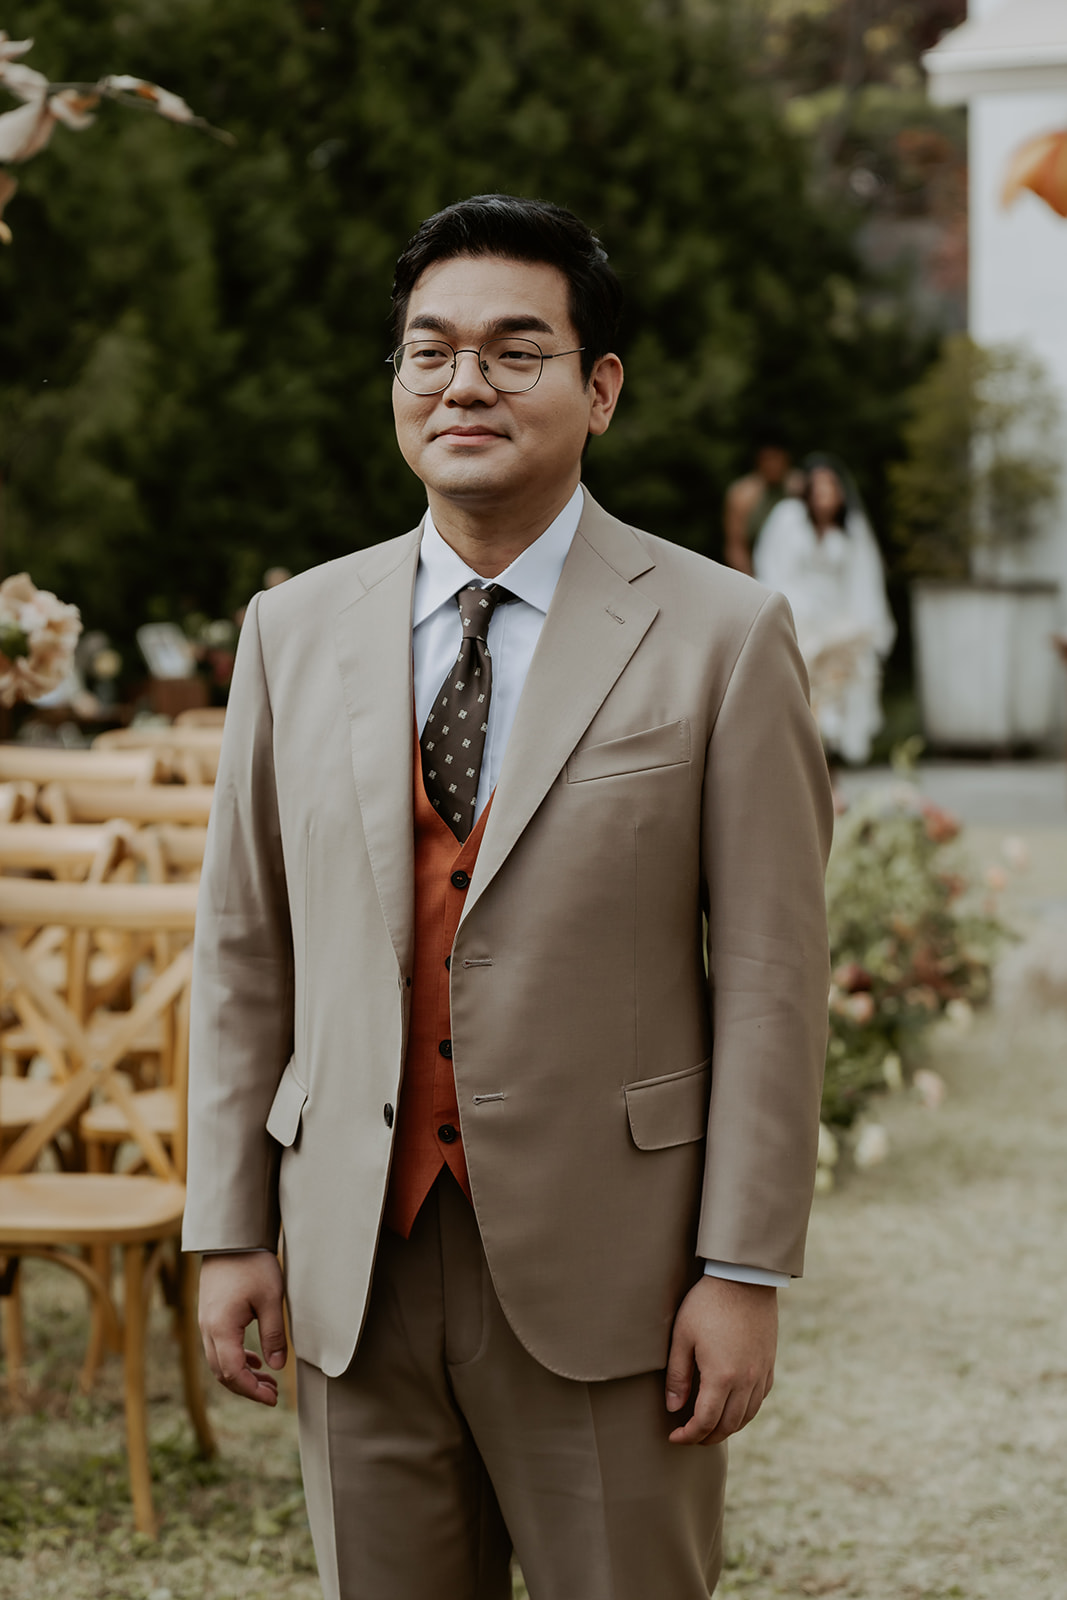 Man in elegant suit smiling at an outdoor wedding ceremony, with a bride visible in the background.